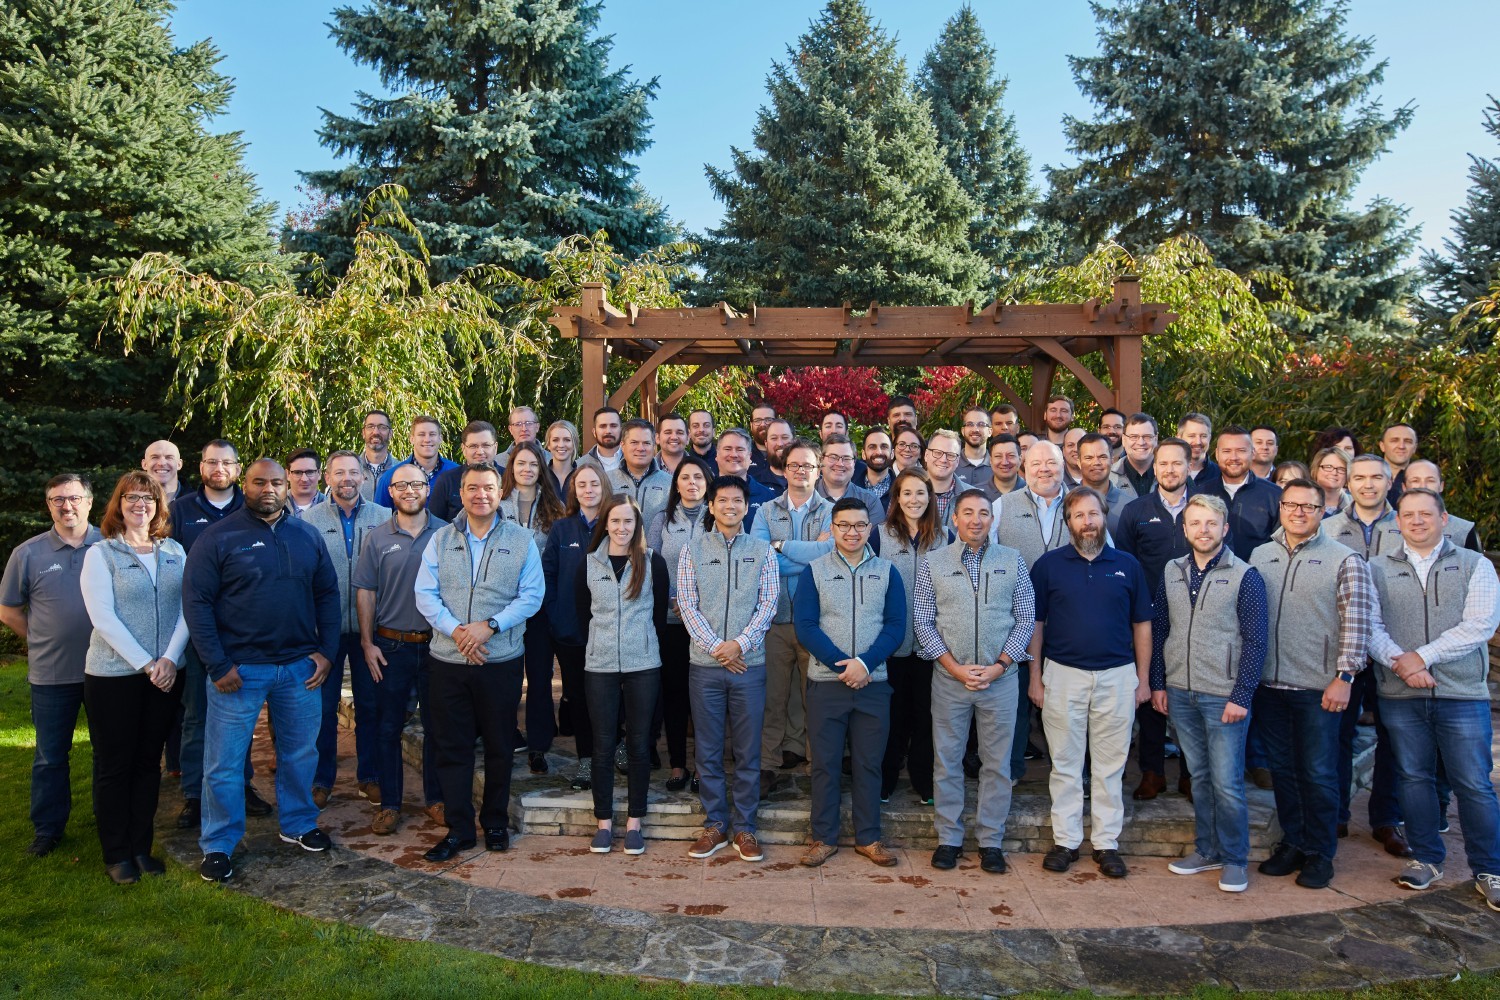 Our annual in-person Staff Retreat in 2019. We will resume these amazing opportunities for team-building in 2022.